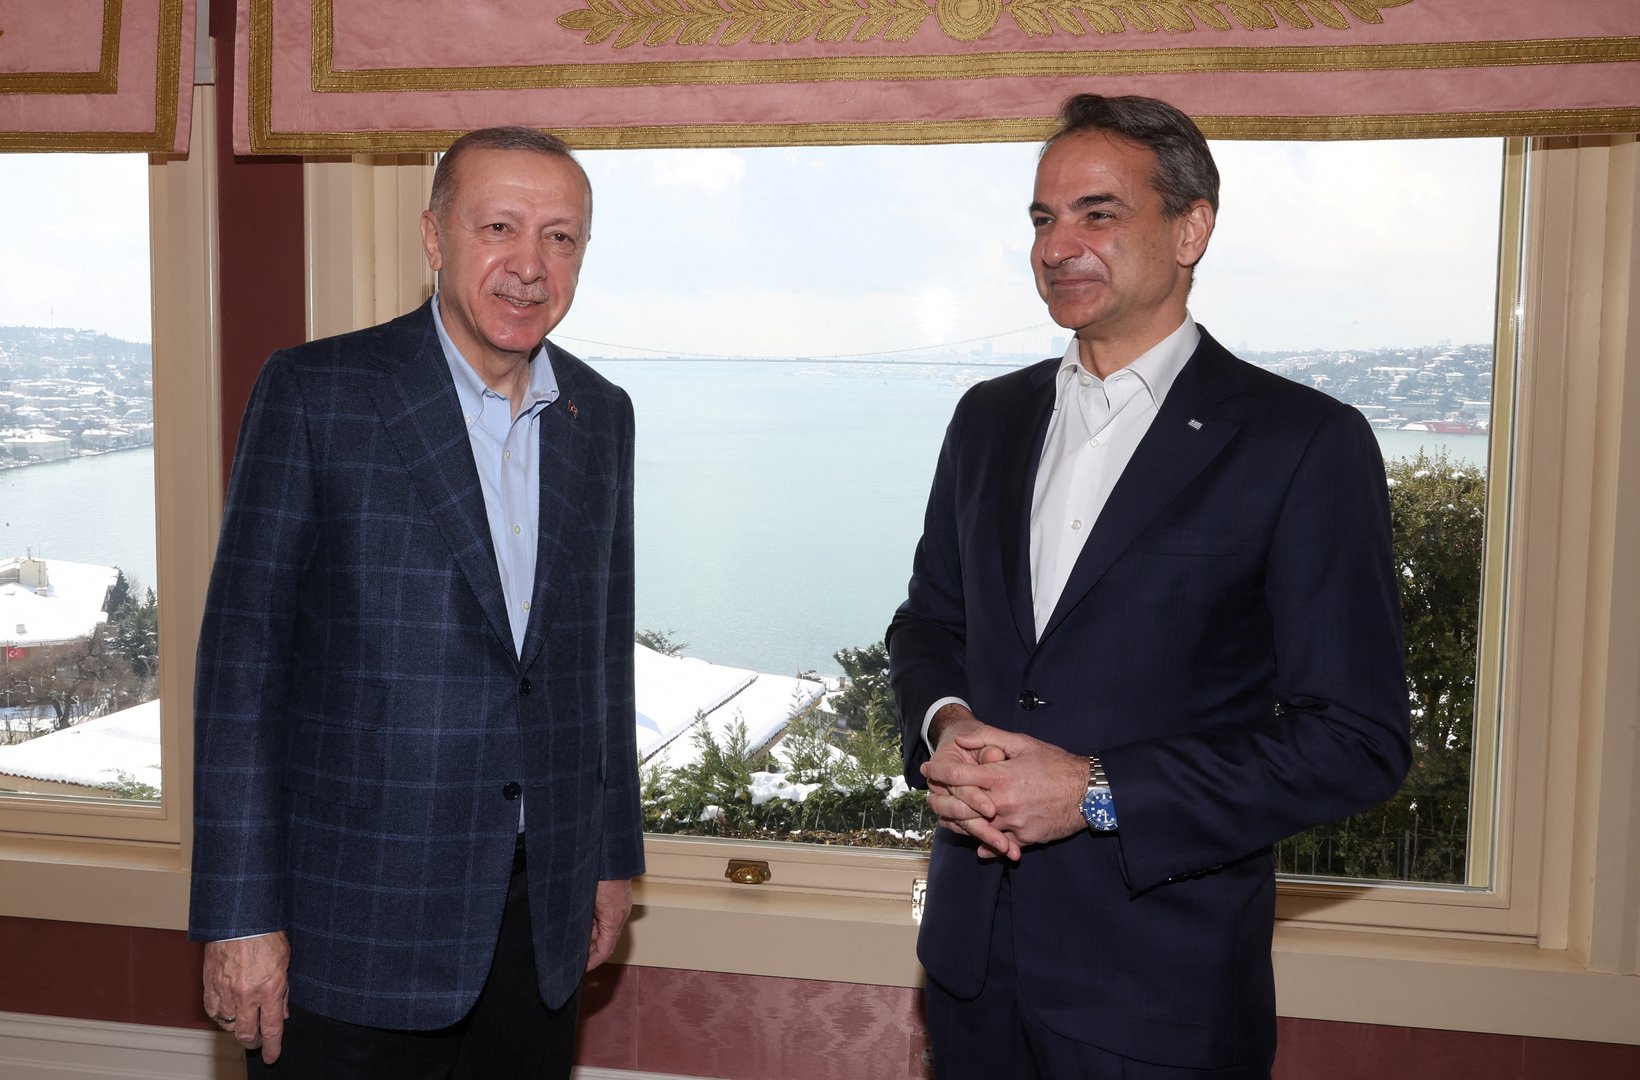 image Breakthrough unlikely, but Erdogan-Mitsotakis meeting ‘a positive step’